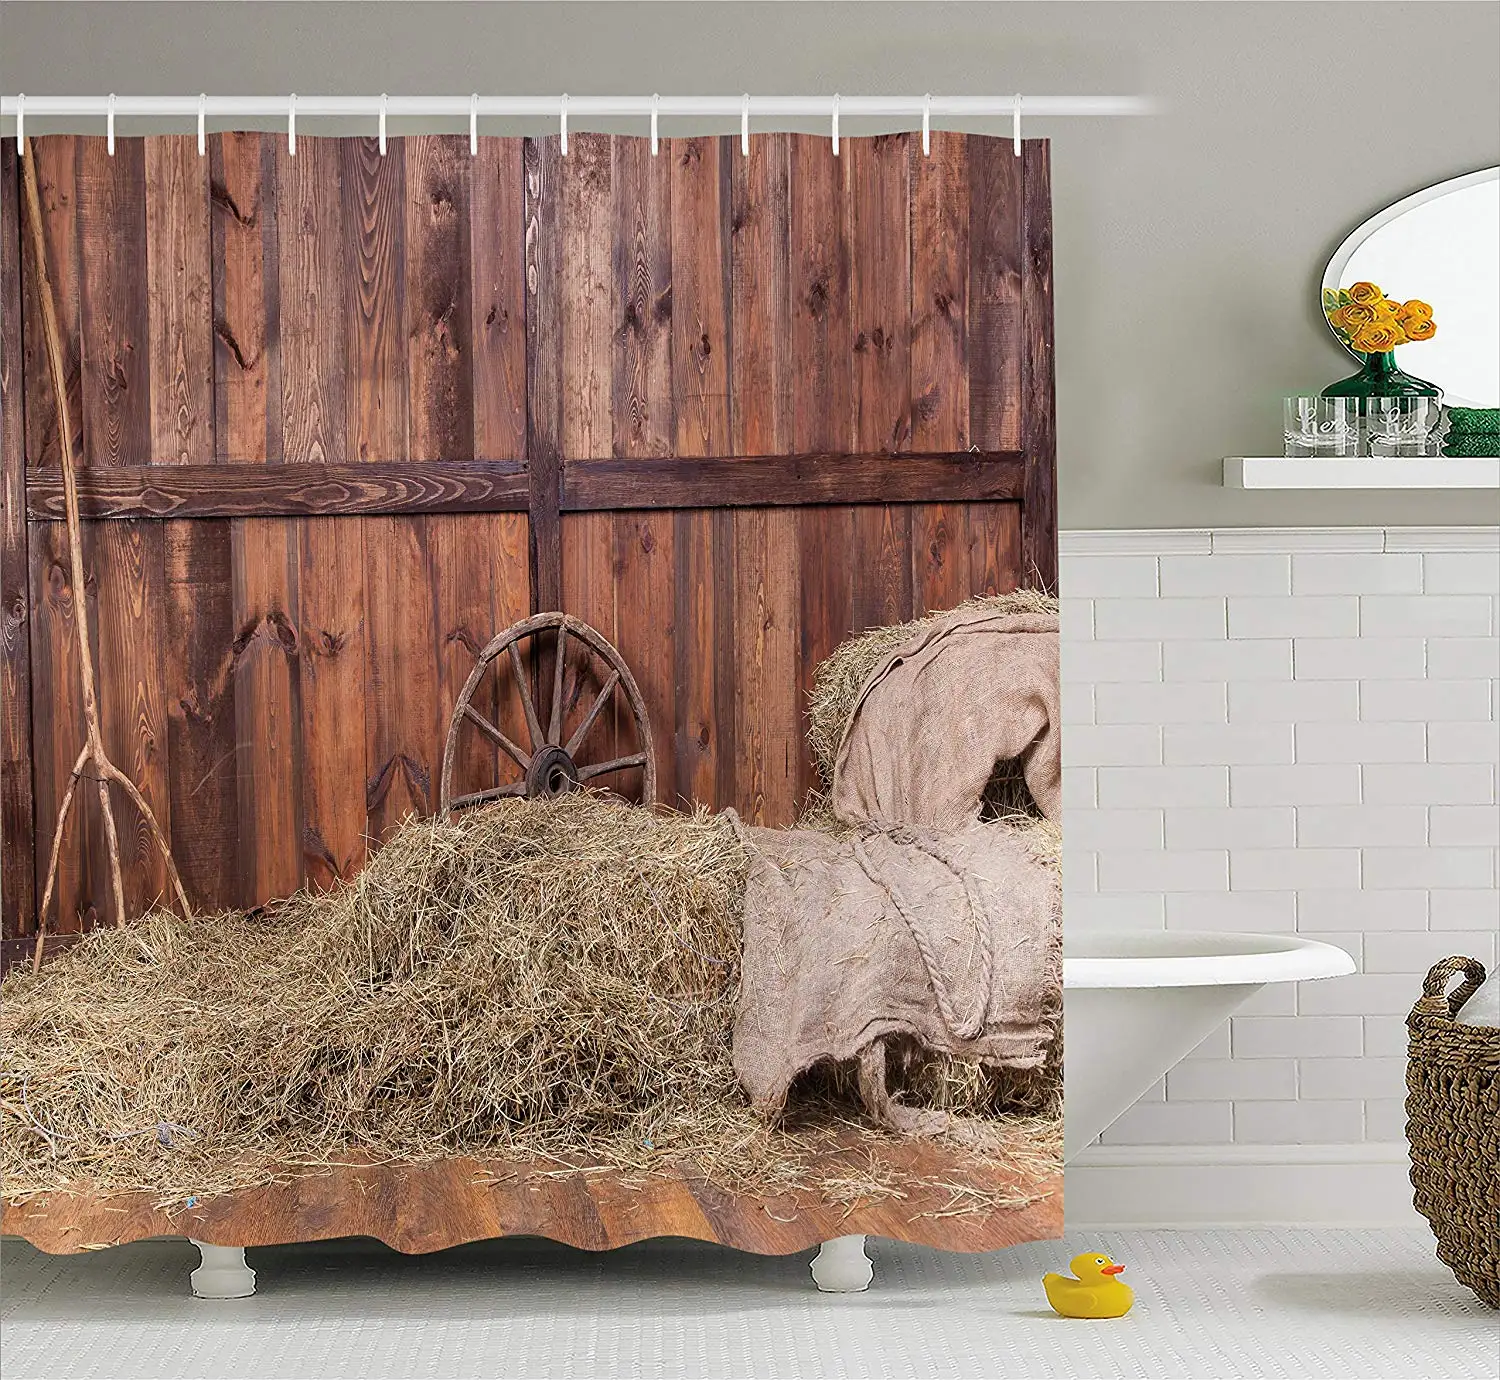 Us 14 56 42 Off Barn Wood Wagon Wheel Shower Curtain Rural Old Horse Stable Barn Interior Hay Wood Planks Image Print In Shower Curtains From Home